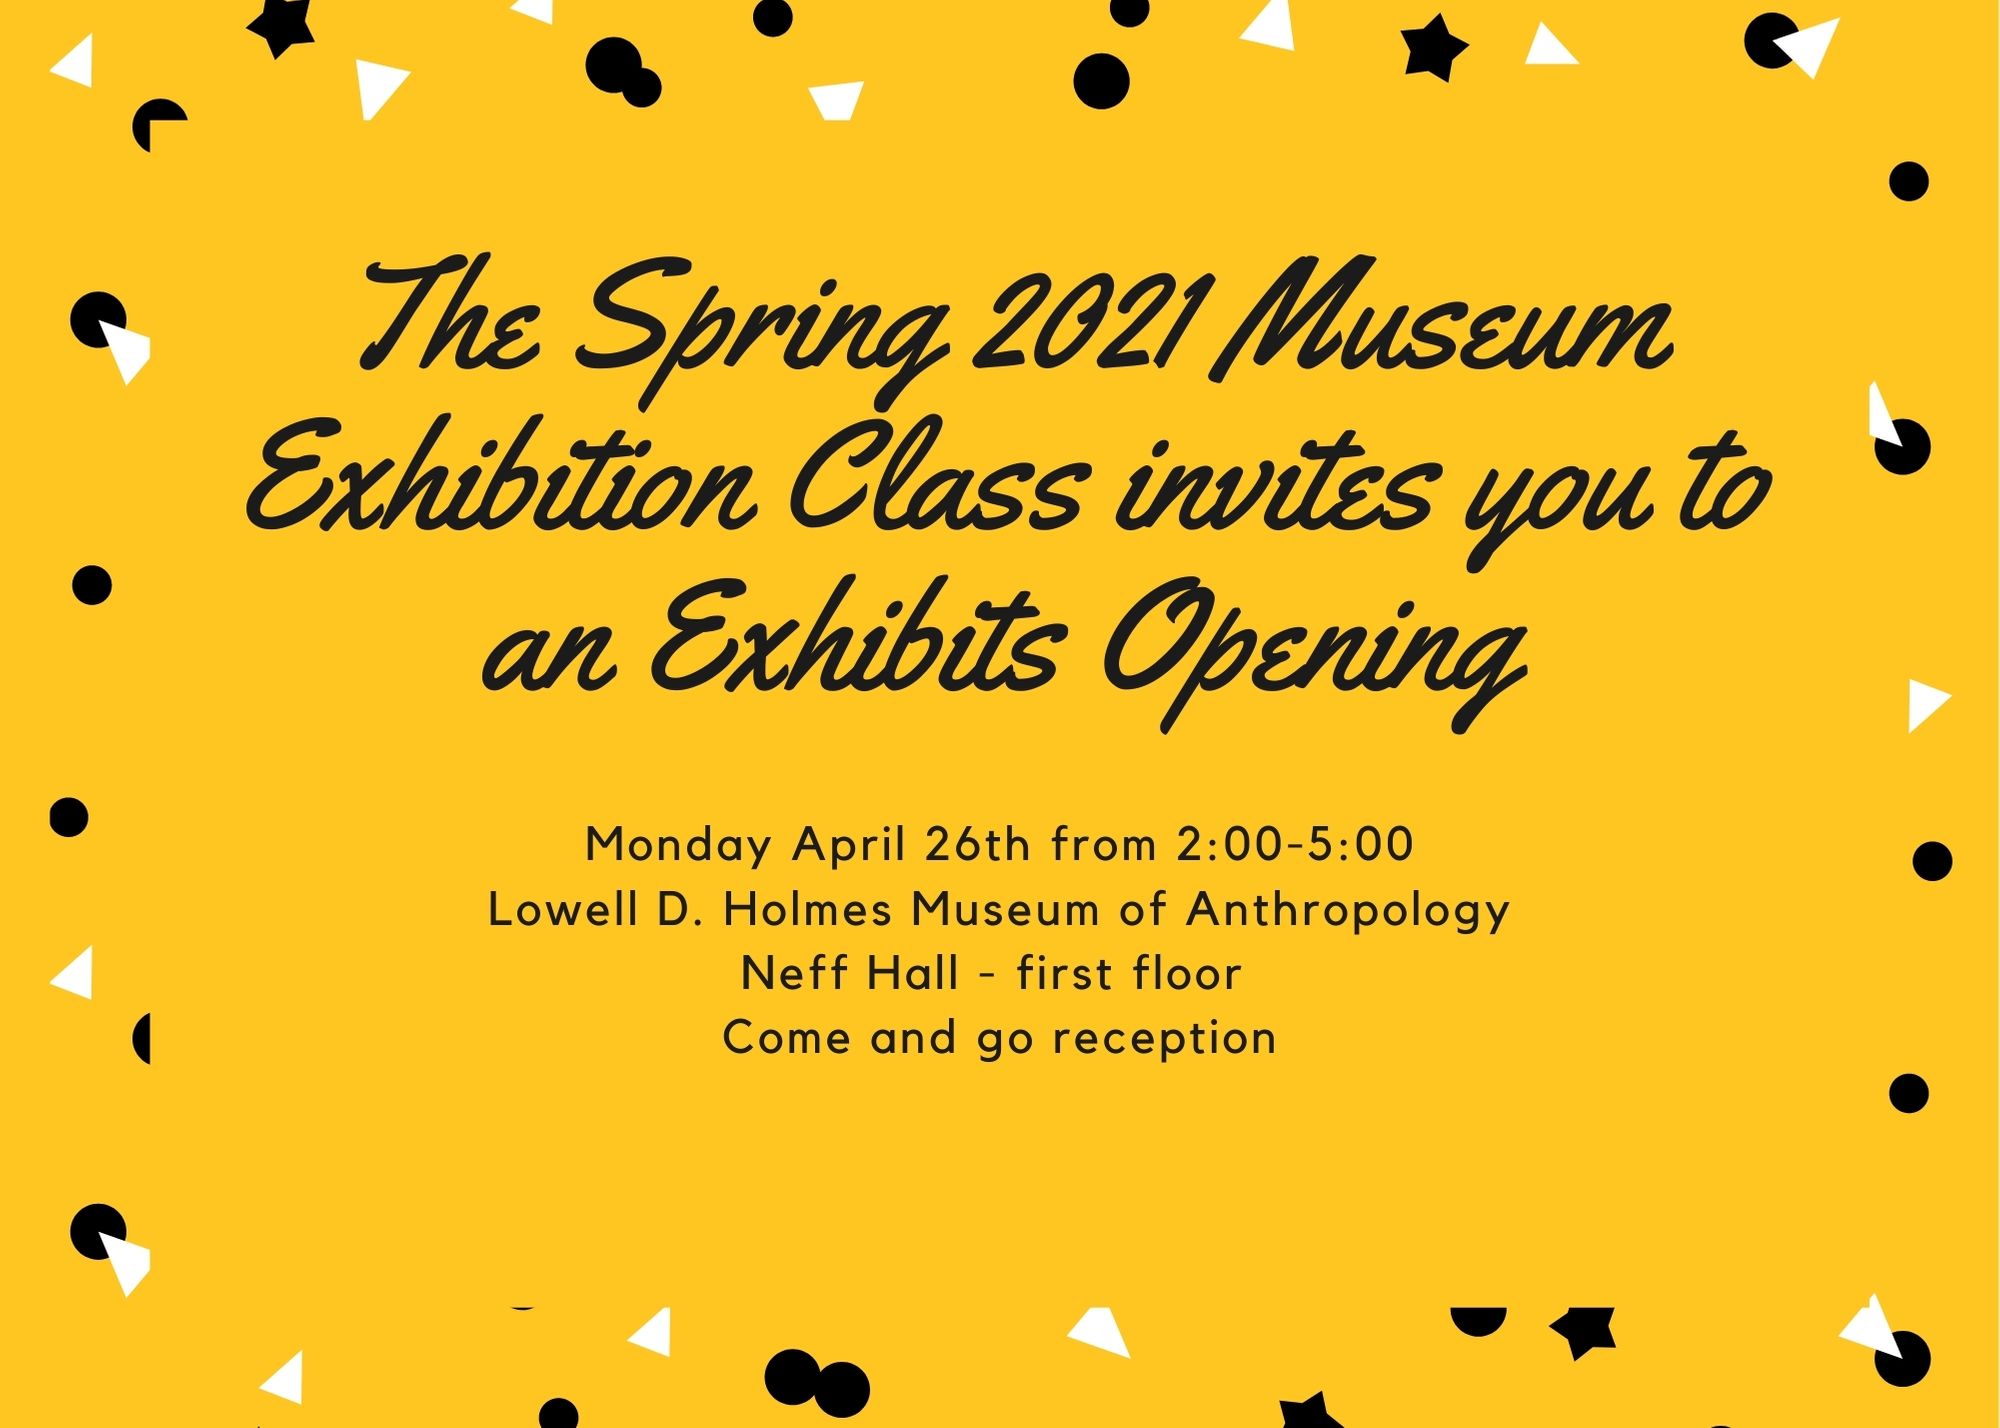 The Spring 2021 Museum Exhibition Class Invites you to an Exhibits Opening Monday April 26th, from 2:00-5:00 Lowell D. Holmes Museum of Anthropology Neff Hall -first floor Come and go reception